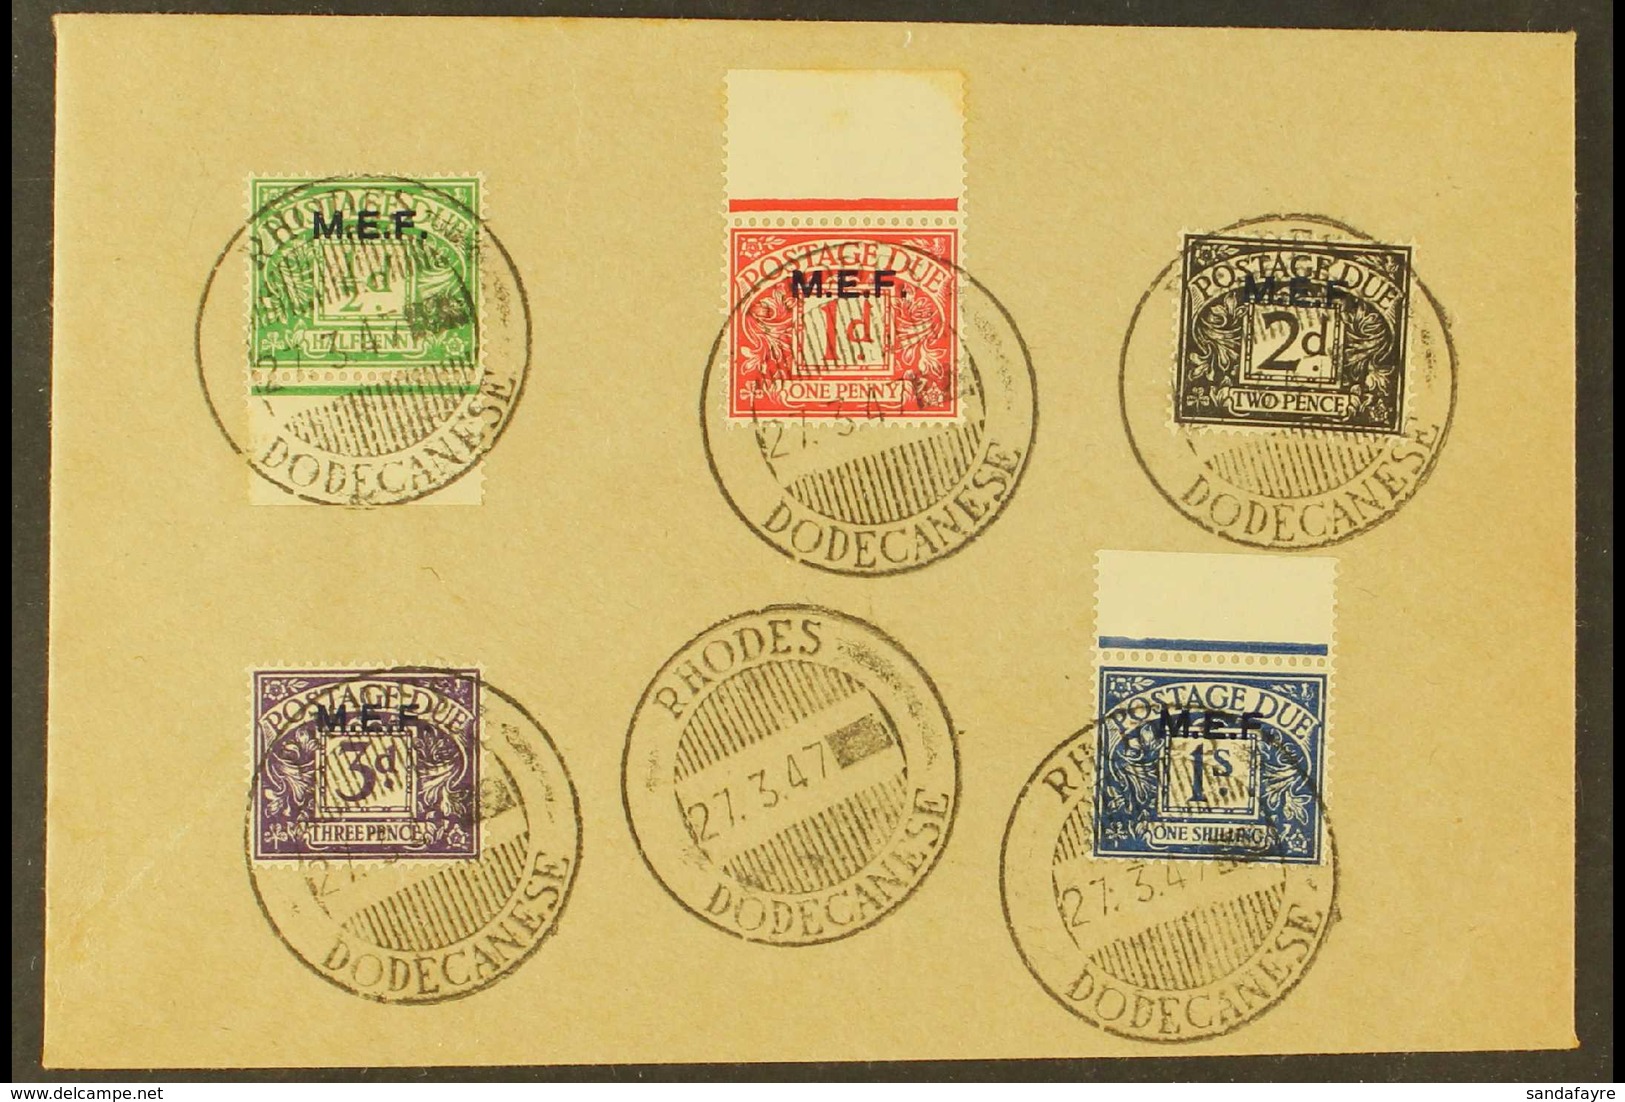 POSTAGE DUES 1942 "M.E.F." Overprints Complete Set (SG D1/5) On Unaddressed Philatelic Cover Tied By Superb "Rhodes / Do - Afrique Orientale Italienne